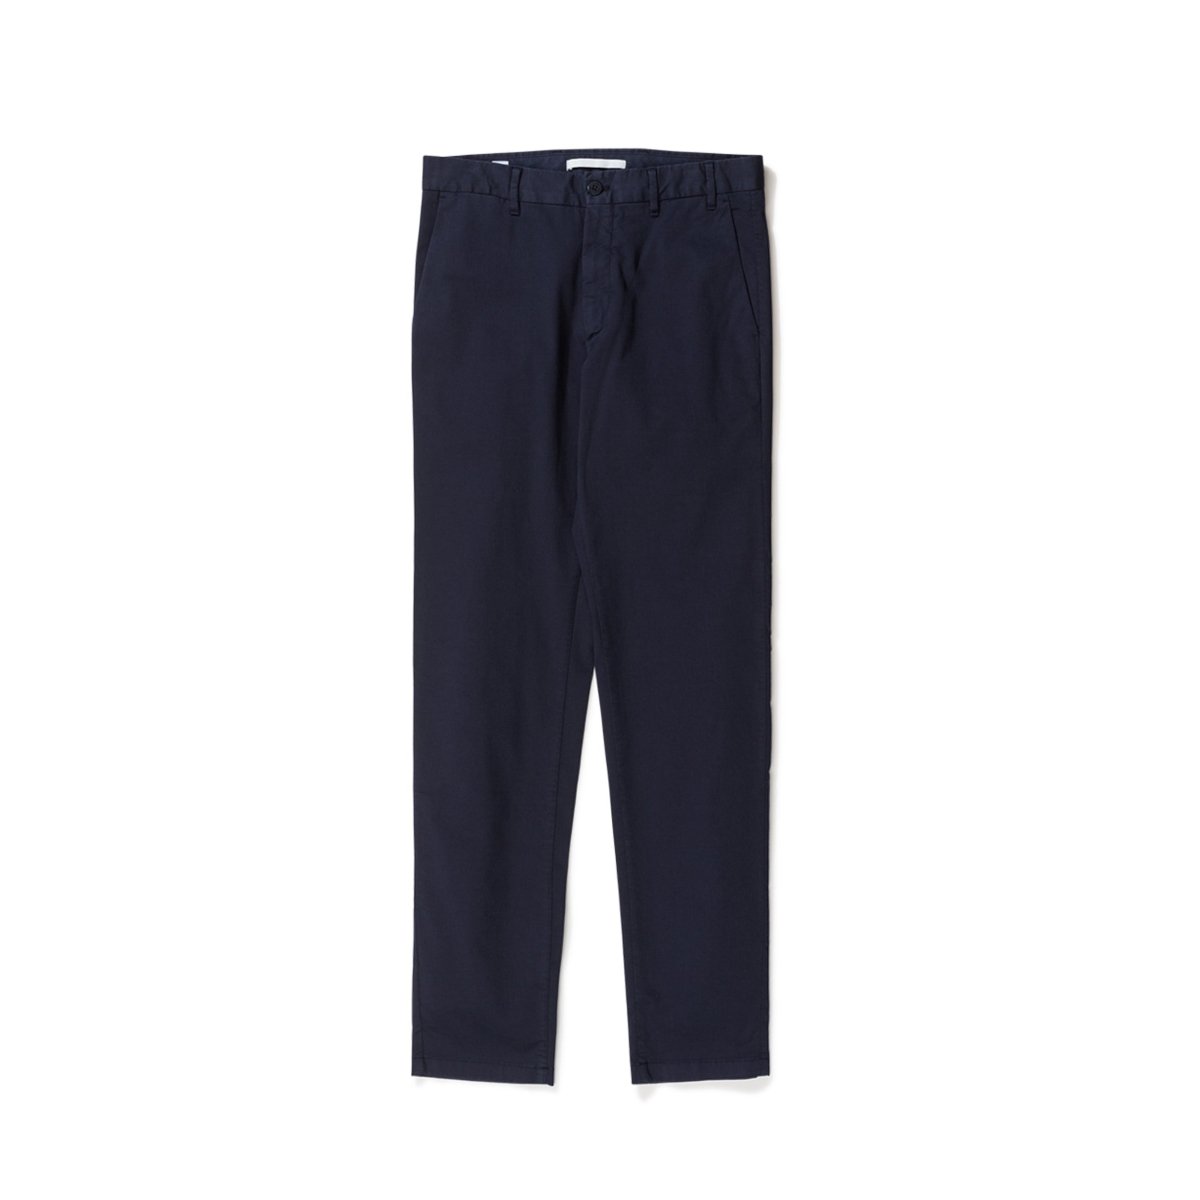 Norse Projects Aros Light Twill Pants (Navy)  - Allike Store